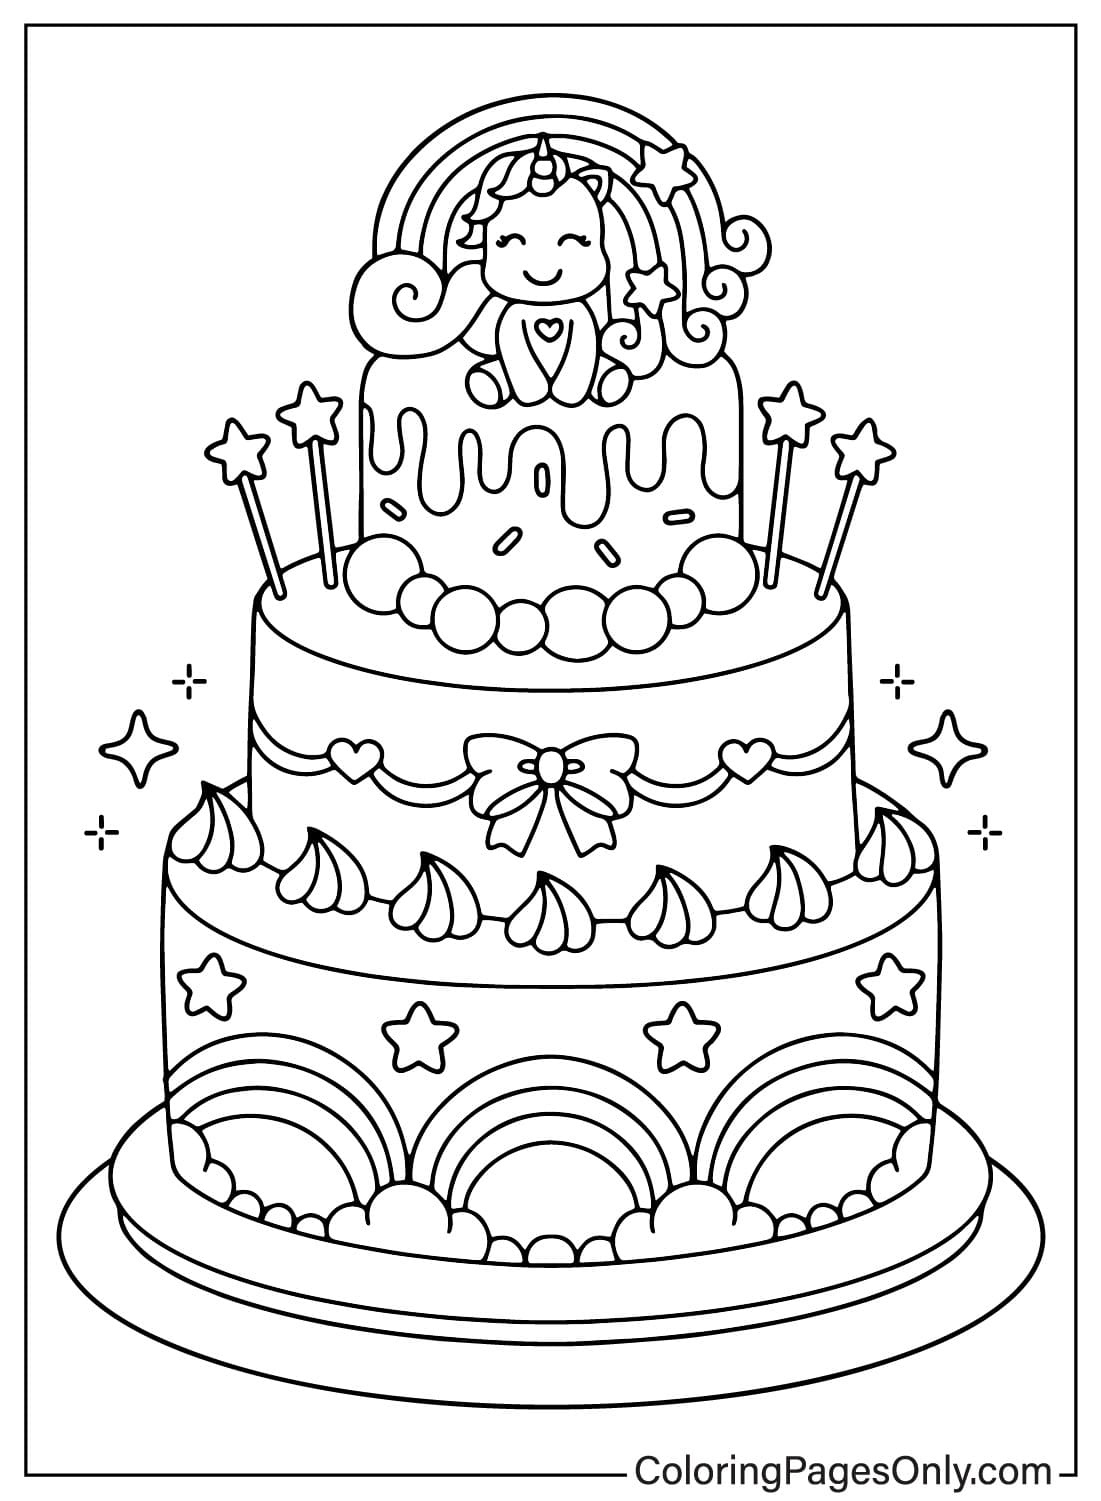 Birthday Cake Color Page from Birthday Cake